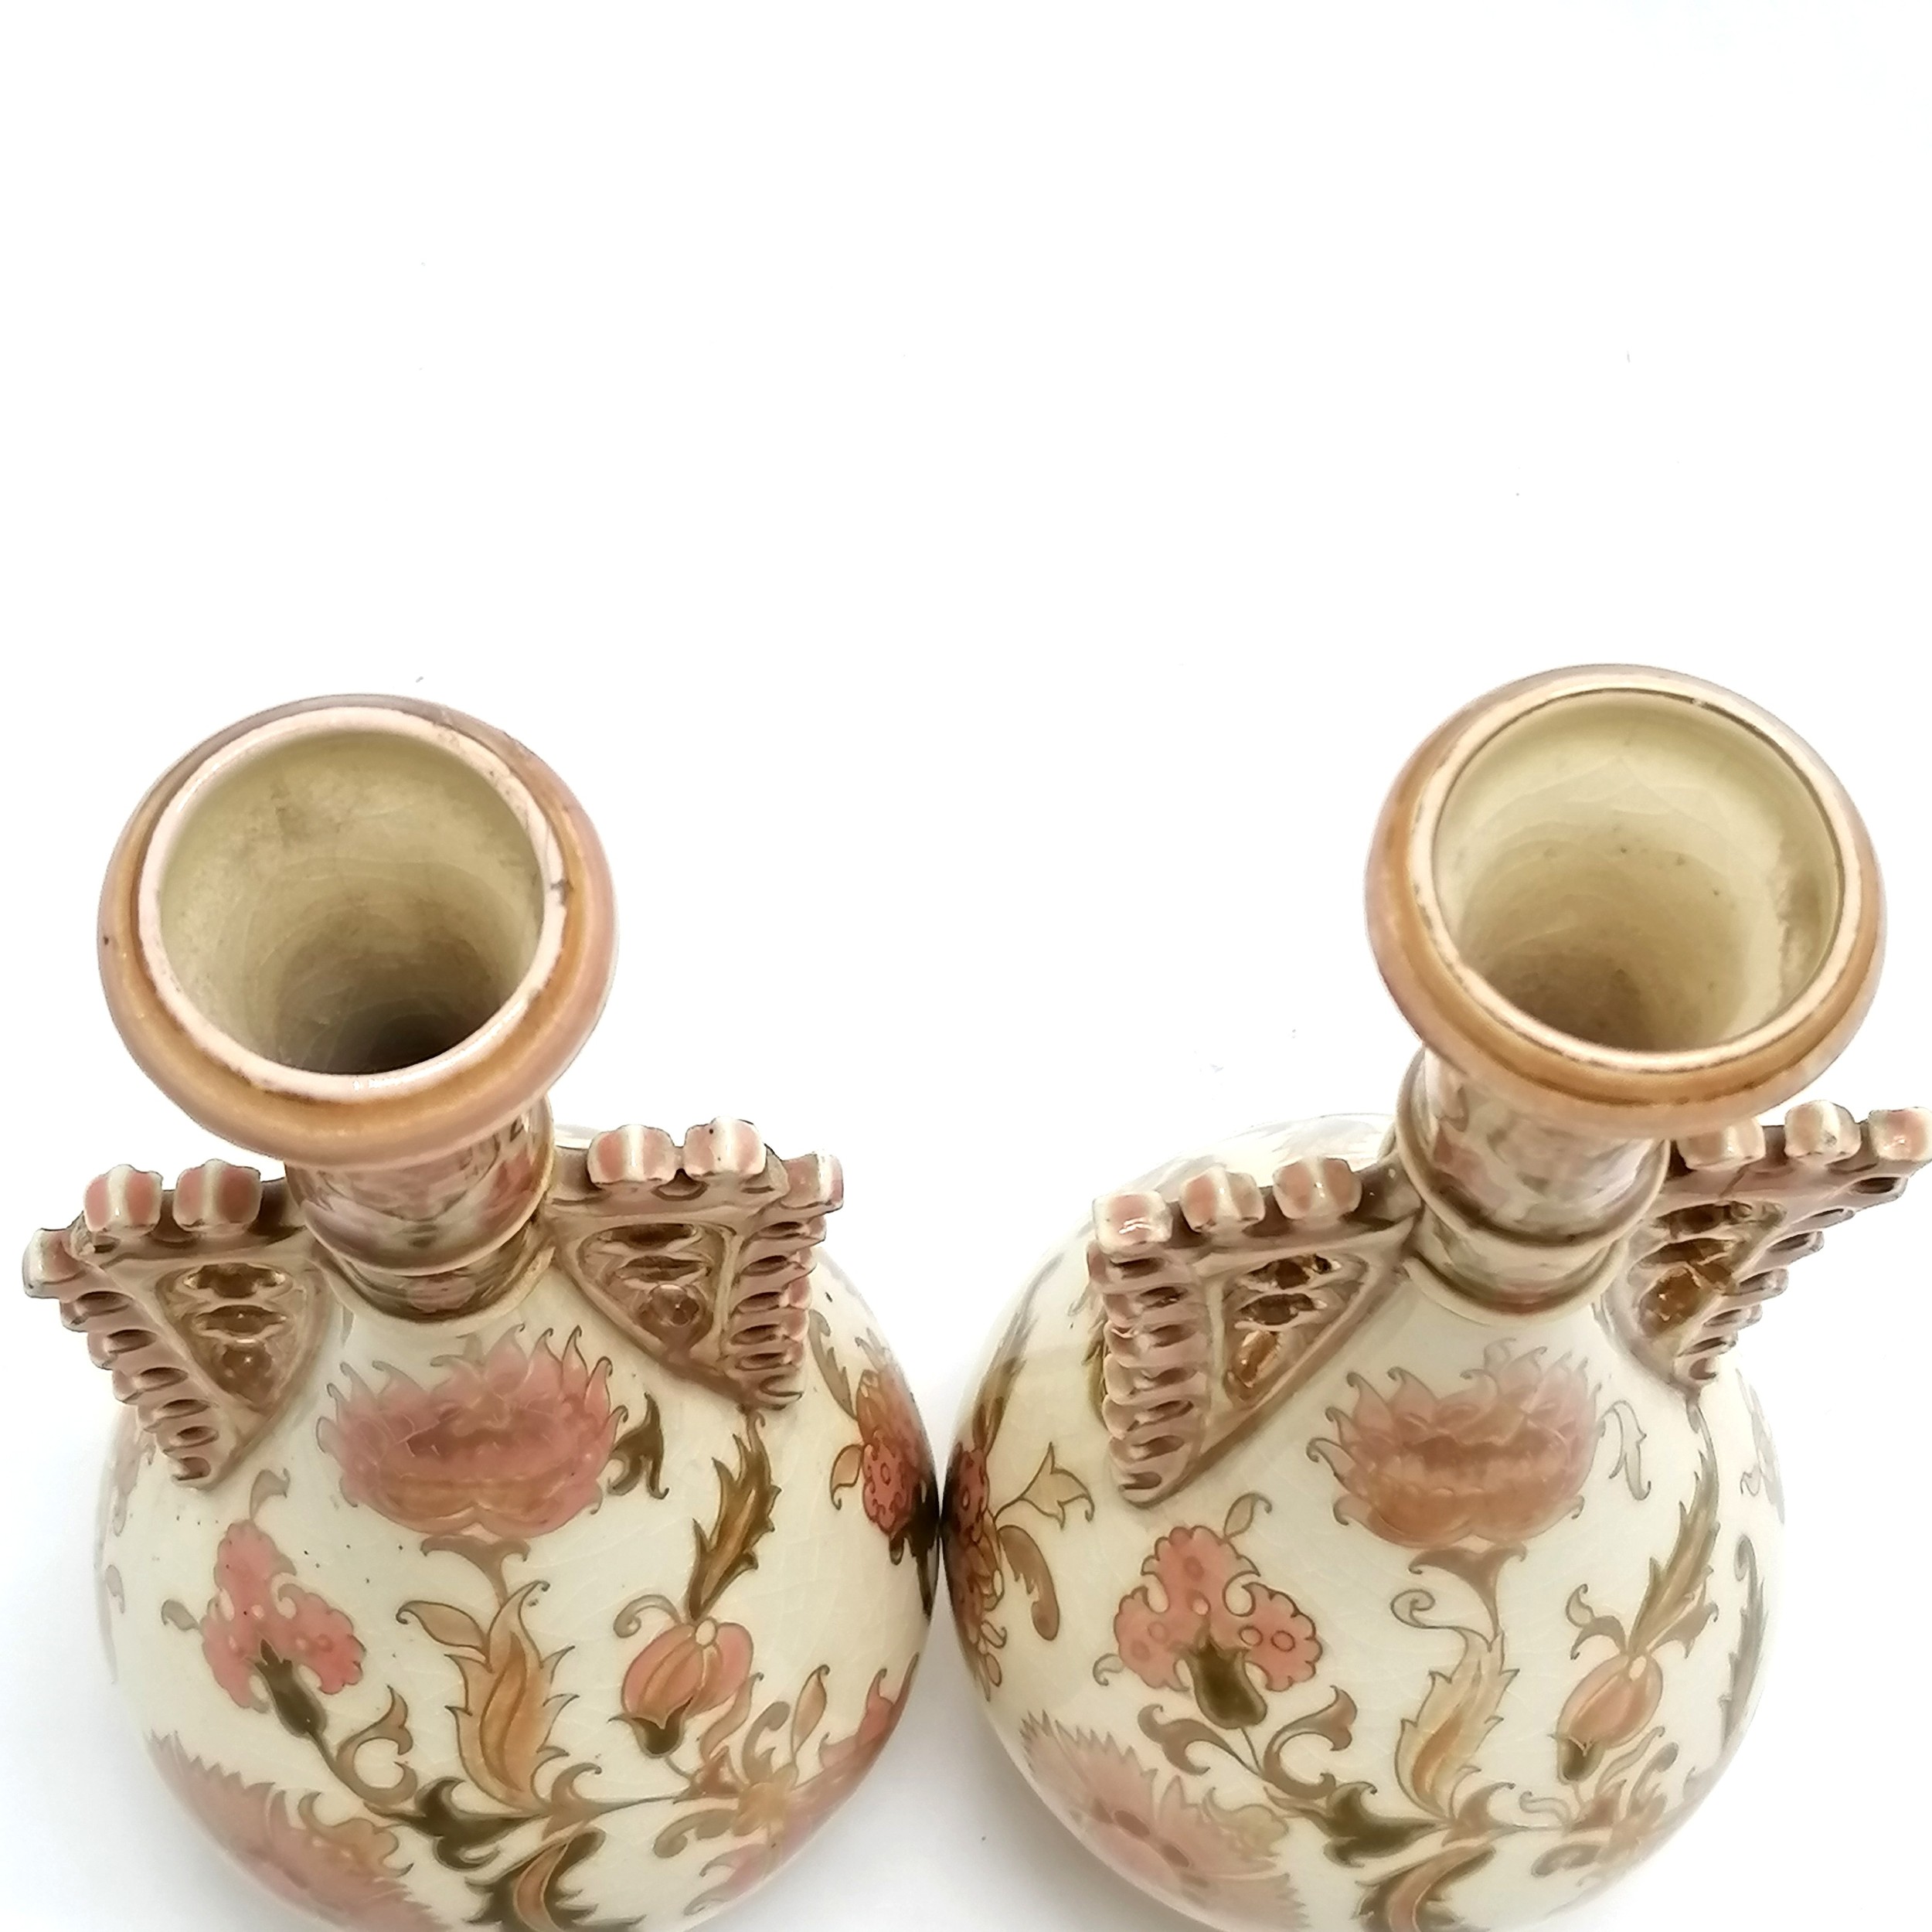 Zsolnay (Pecs, Hungary) pair of decorative vases - 21cm high & both are a/f - Image 2 of 8